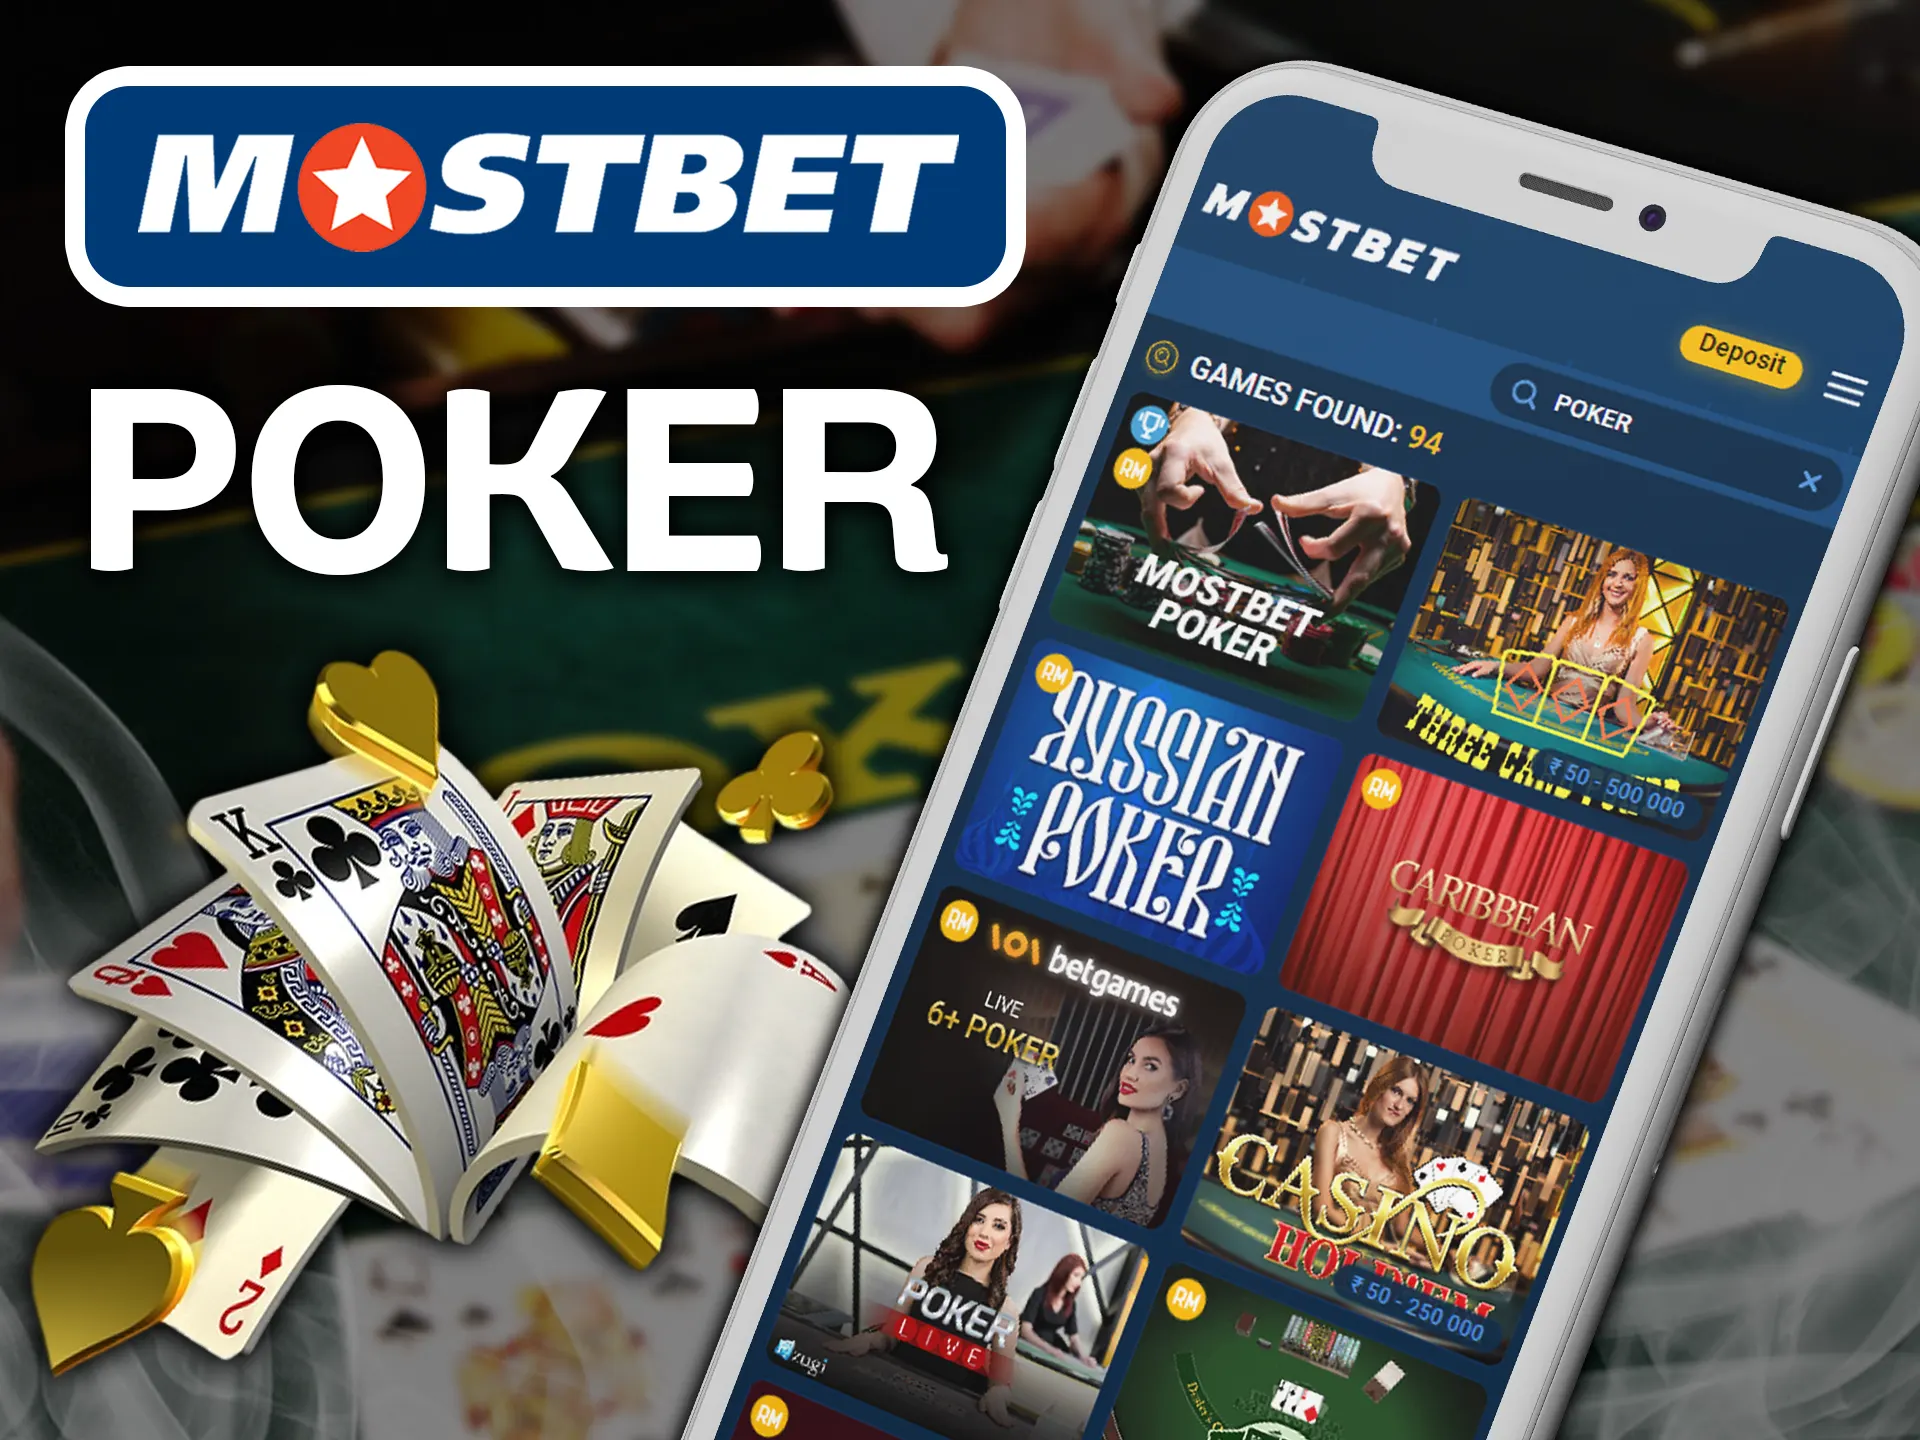 Play poker games at Mostbet using special casino app.